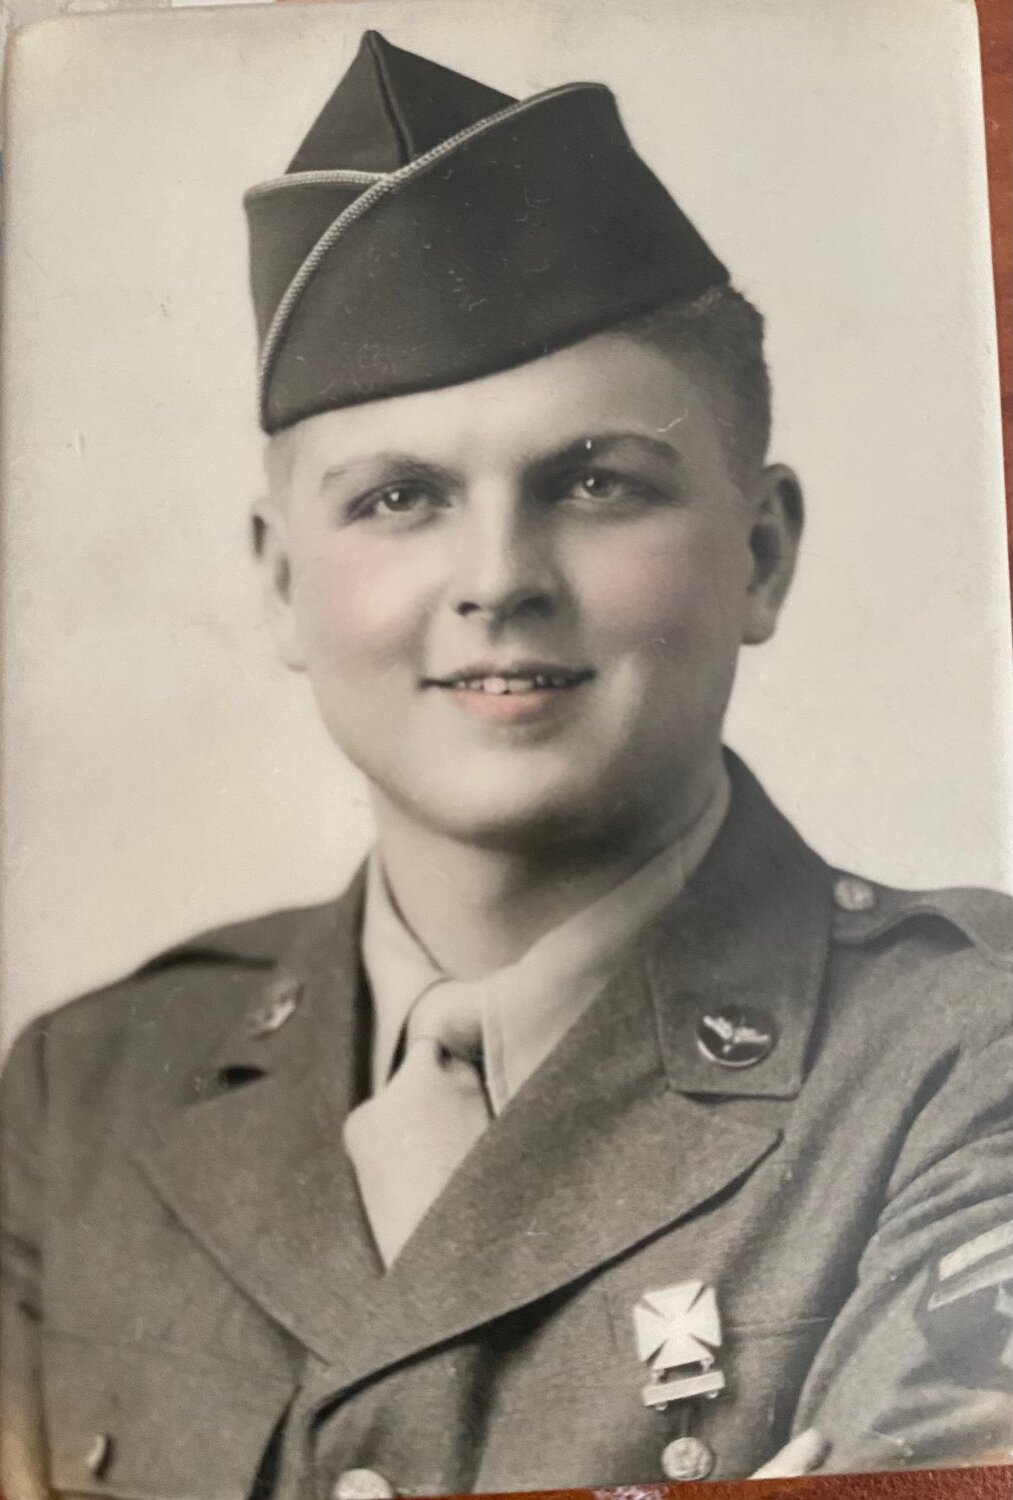 Sinuk is a World War II veteran, who served in the 483rd Bombardment Group H, and worked on radio communications of B-17 Bombers, flying missions in Europe .